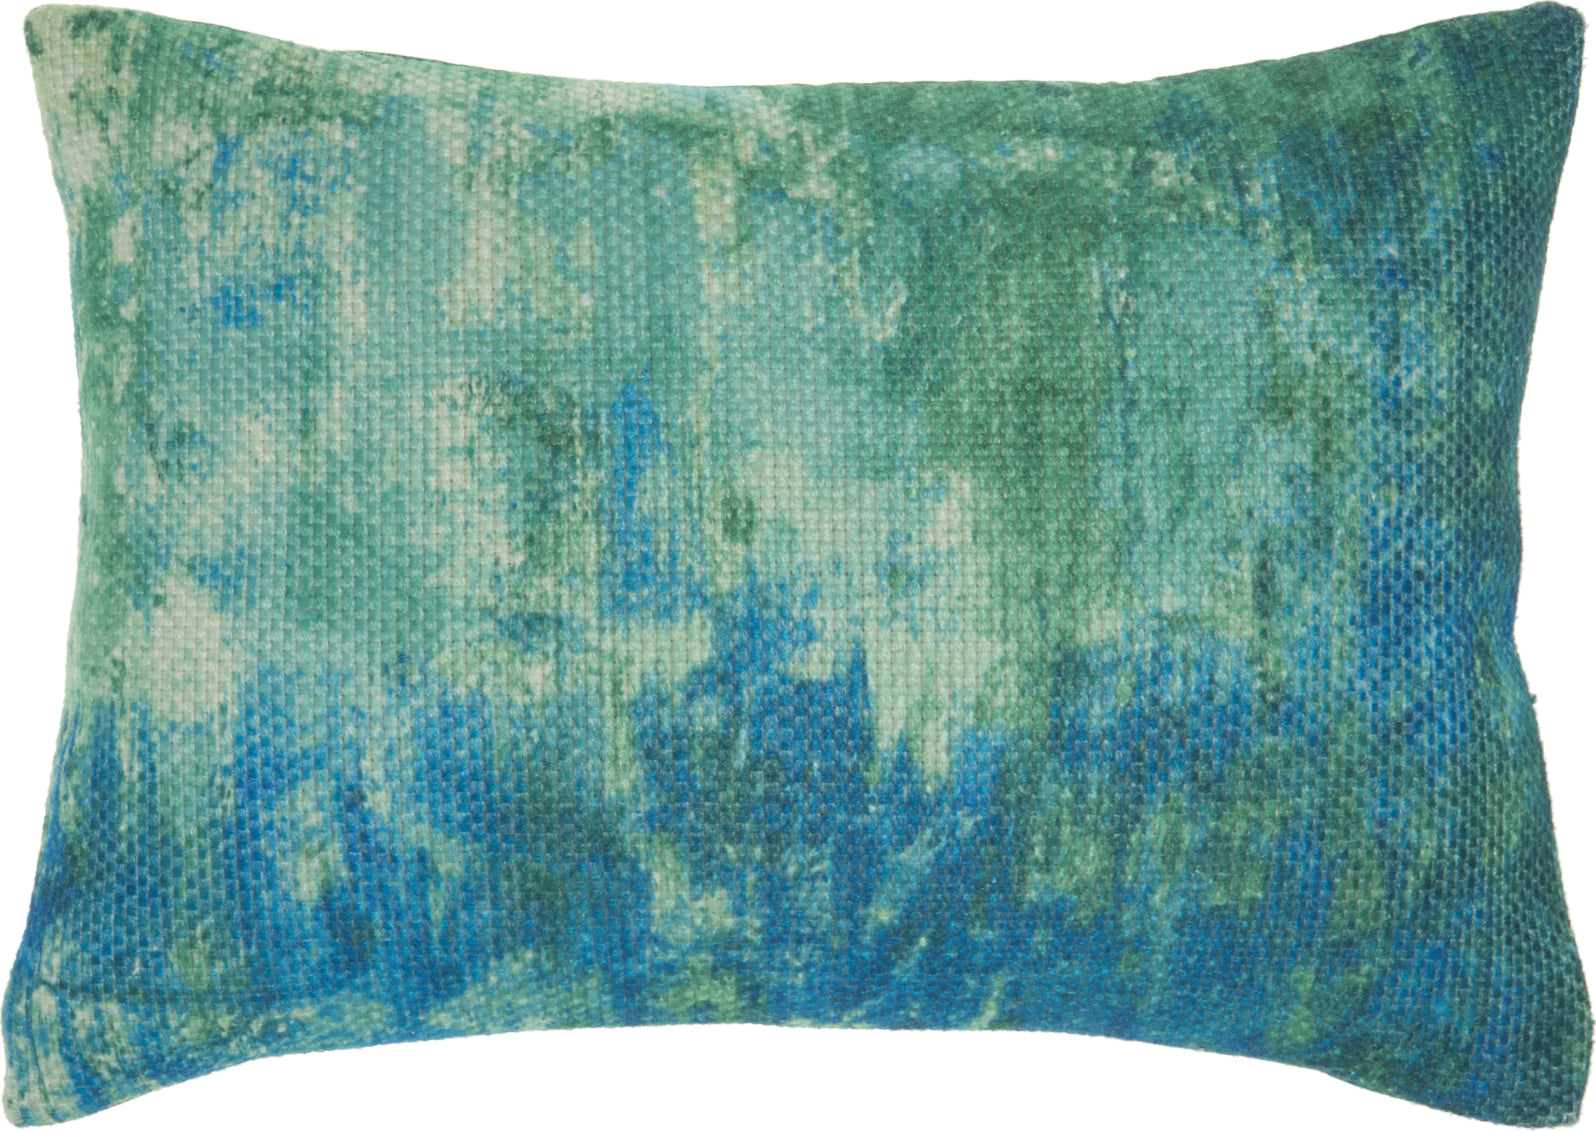 Nourison Outdoor Pillows Watercolor Blue/Green by Mina Victory main image